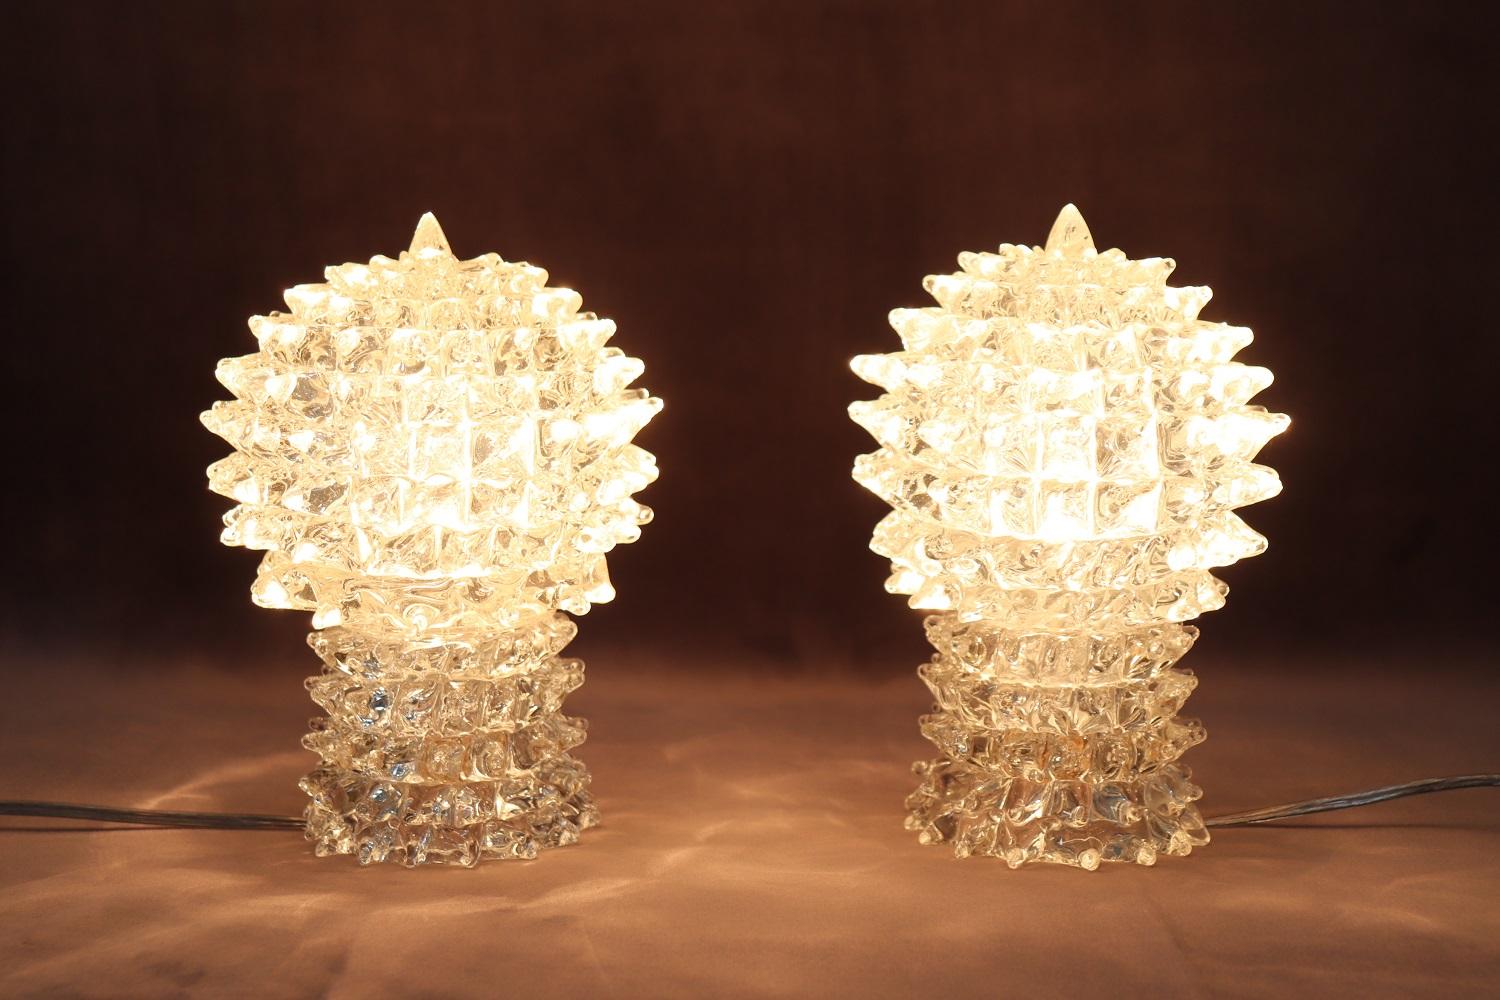 Fantastic pair of Italian design table lamps from around 1940s. Made of precious transparent Murano glass. Characterized by a particular shape with the glass has a particular pointed decoration called rostrato. Perfect for placing on bedside tables.